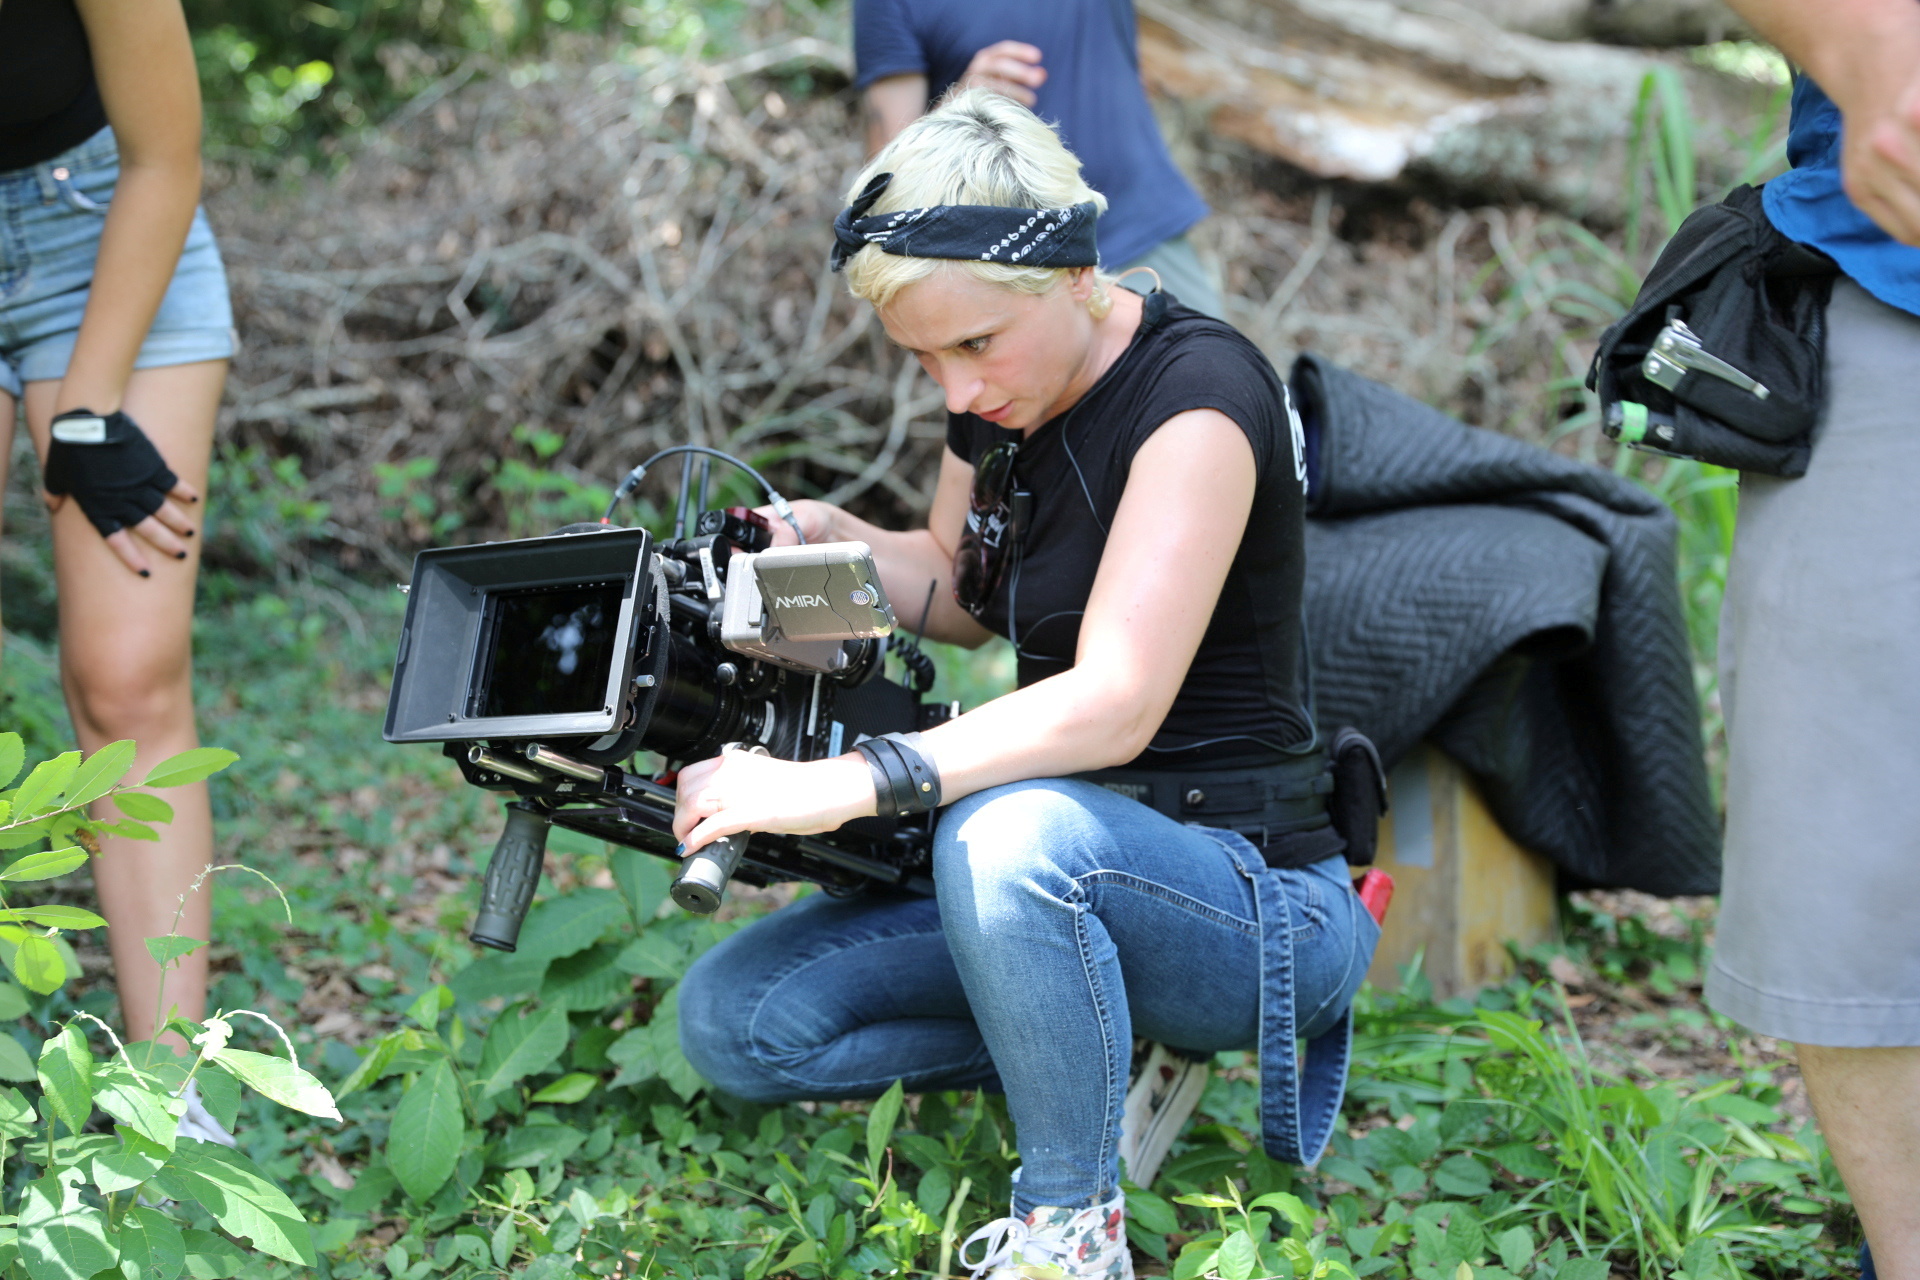 Director of Photography, Halyna Hutchins